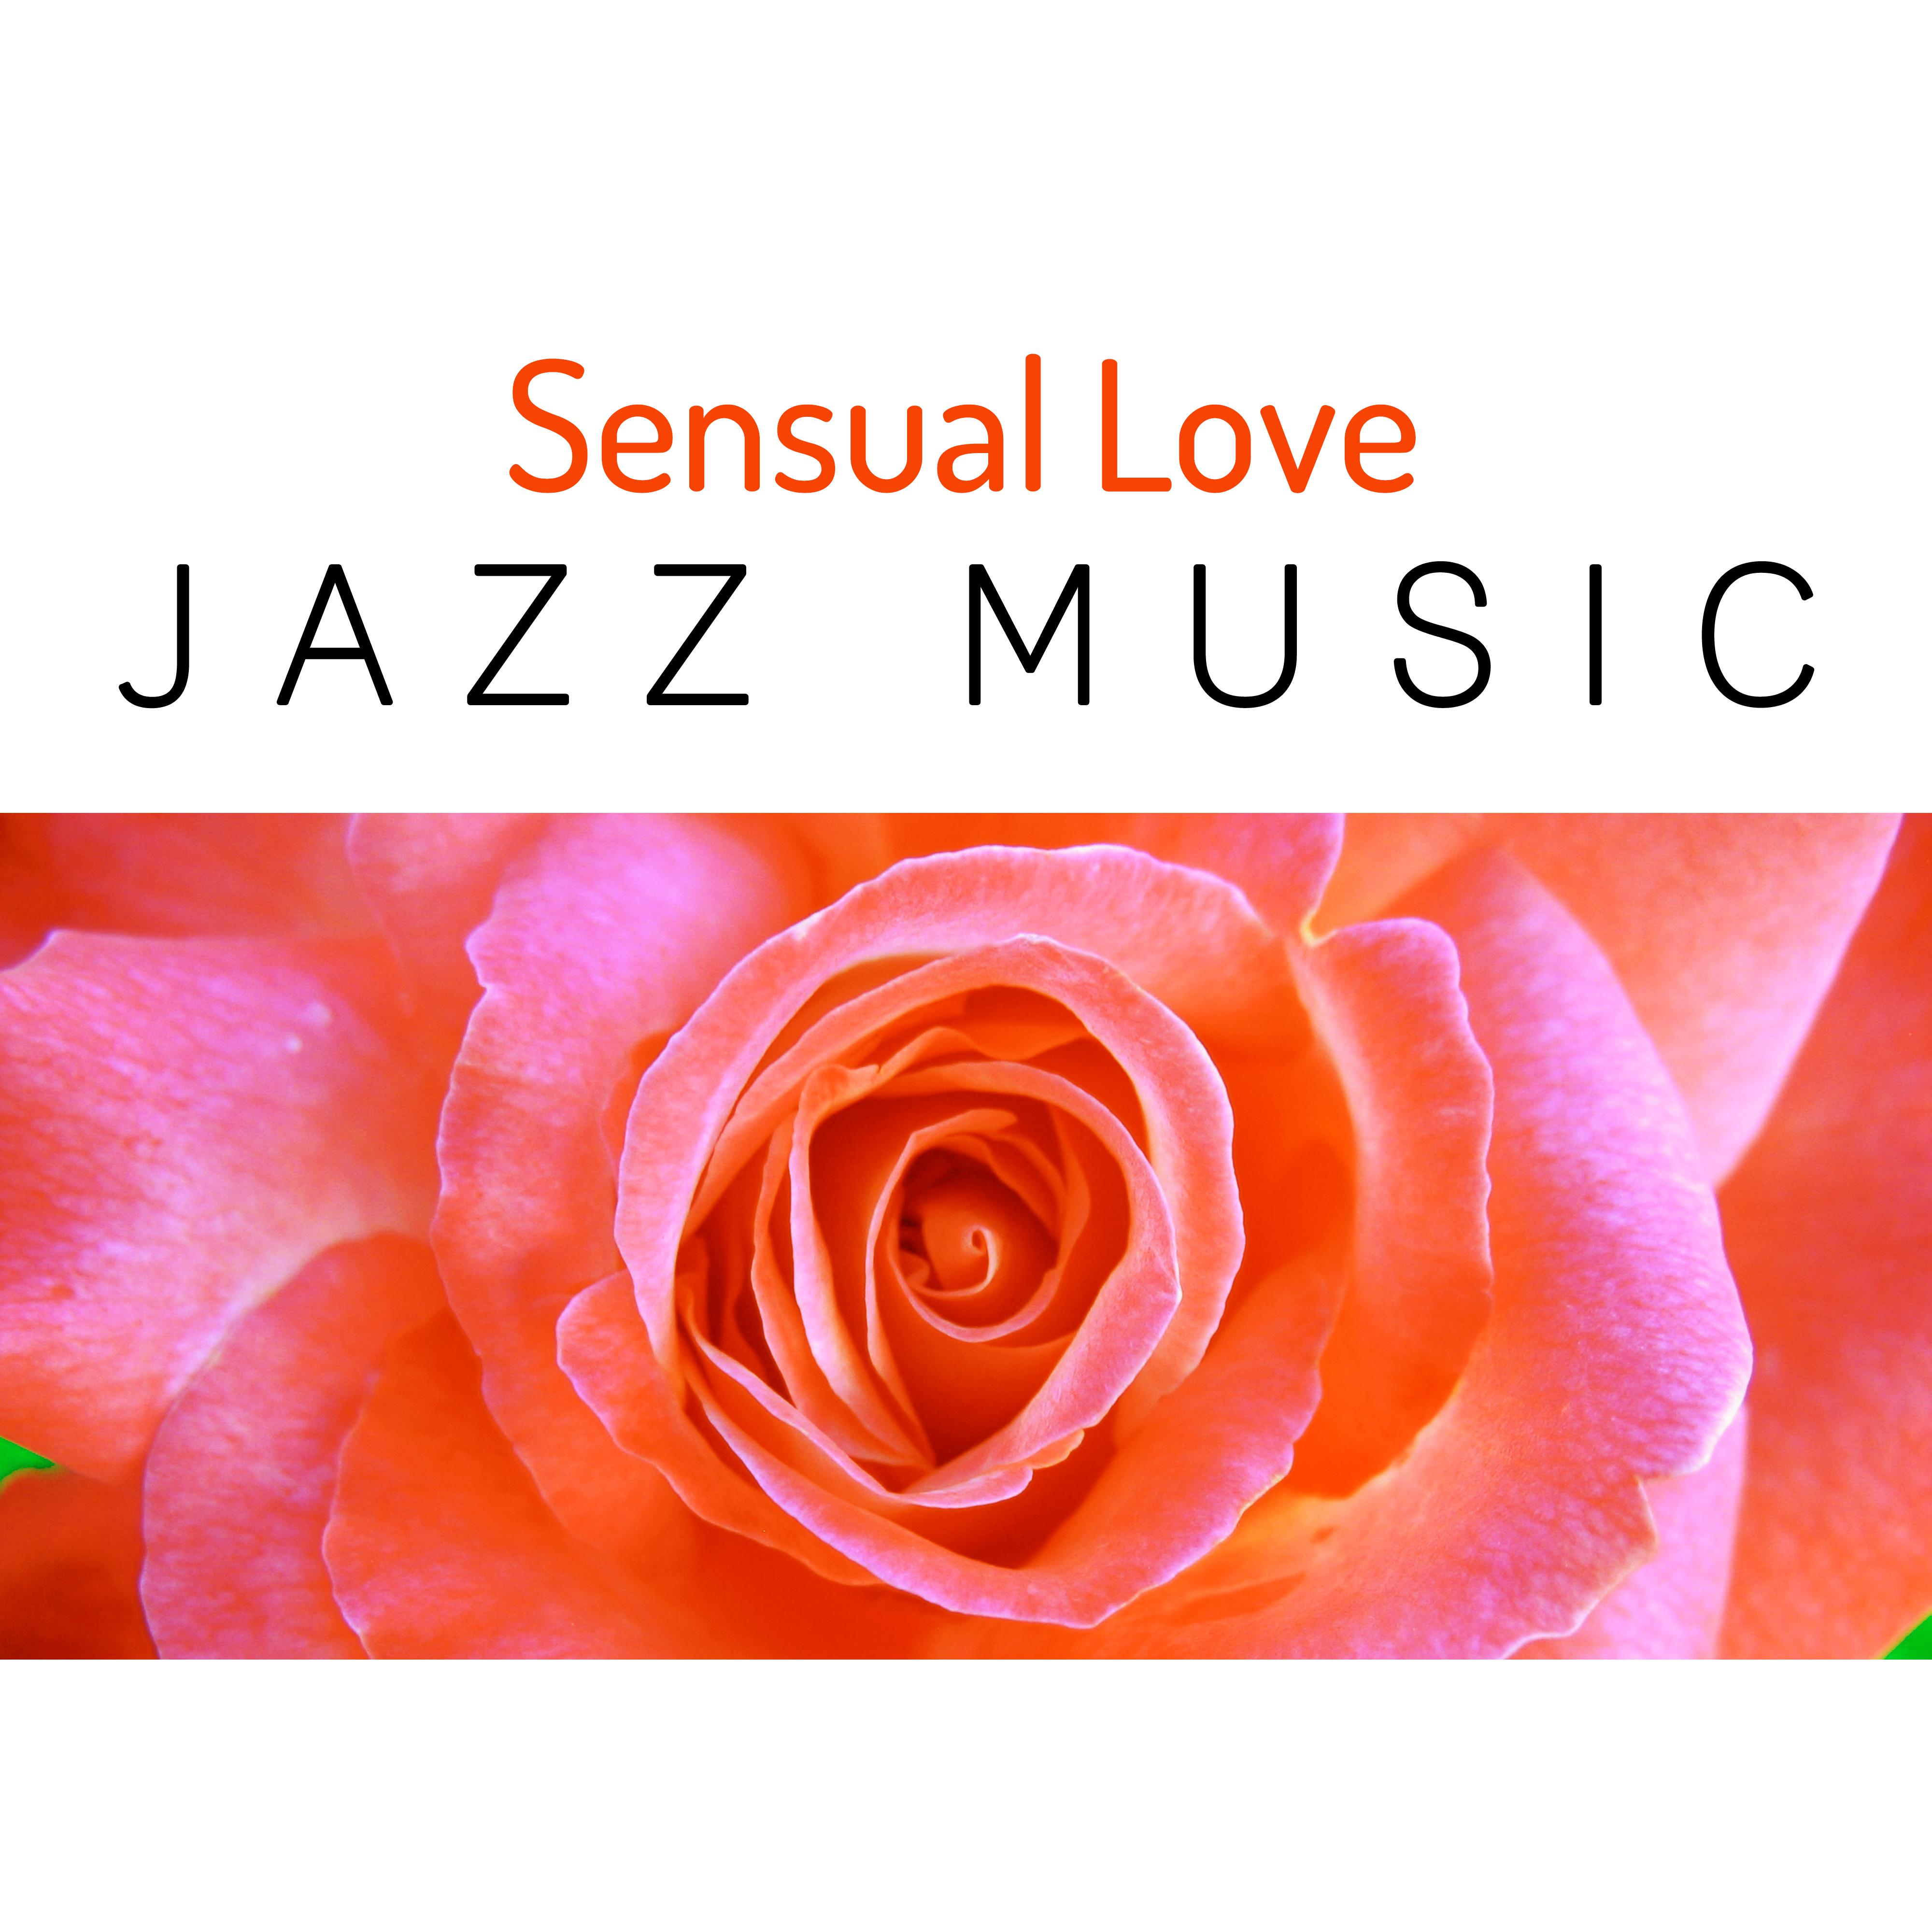 Sensual Love Jazz Music  Calming Music for Lovers, Moonlight Jazz, Soft Piano Jazz, Smooth Sounds